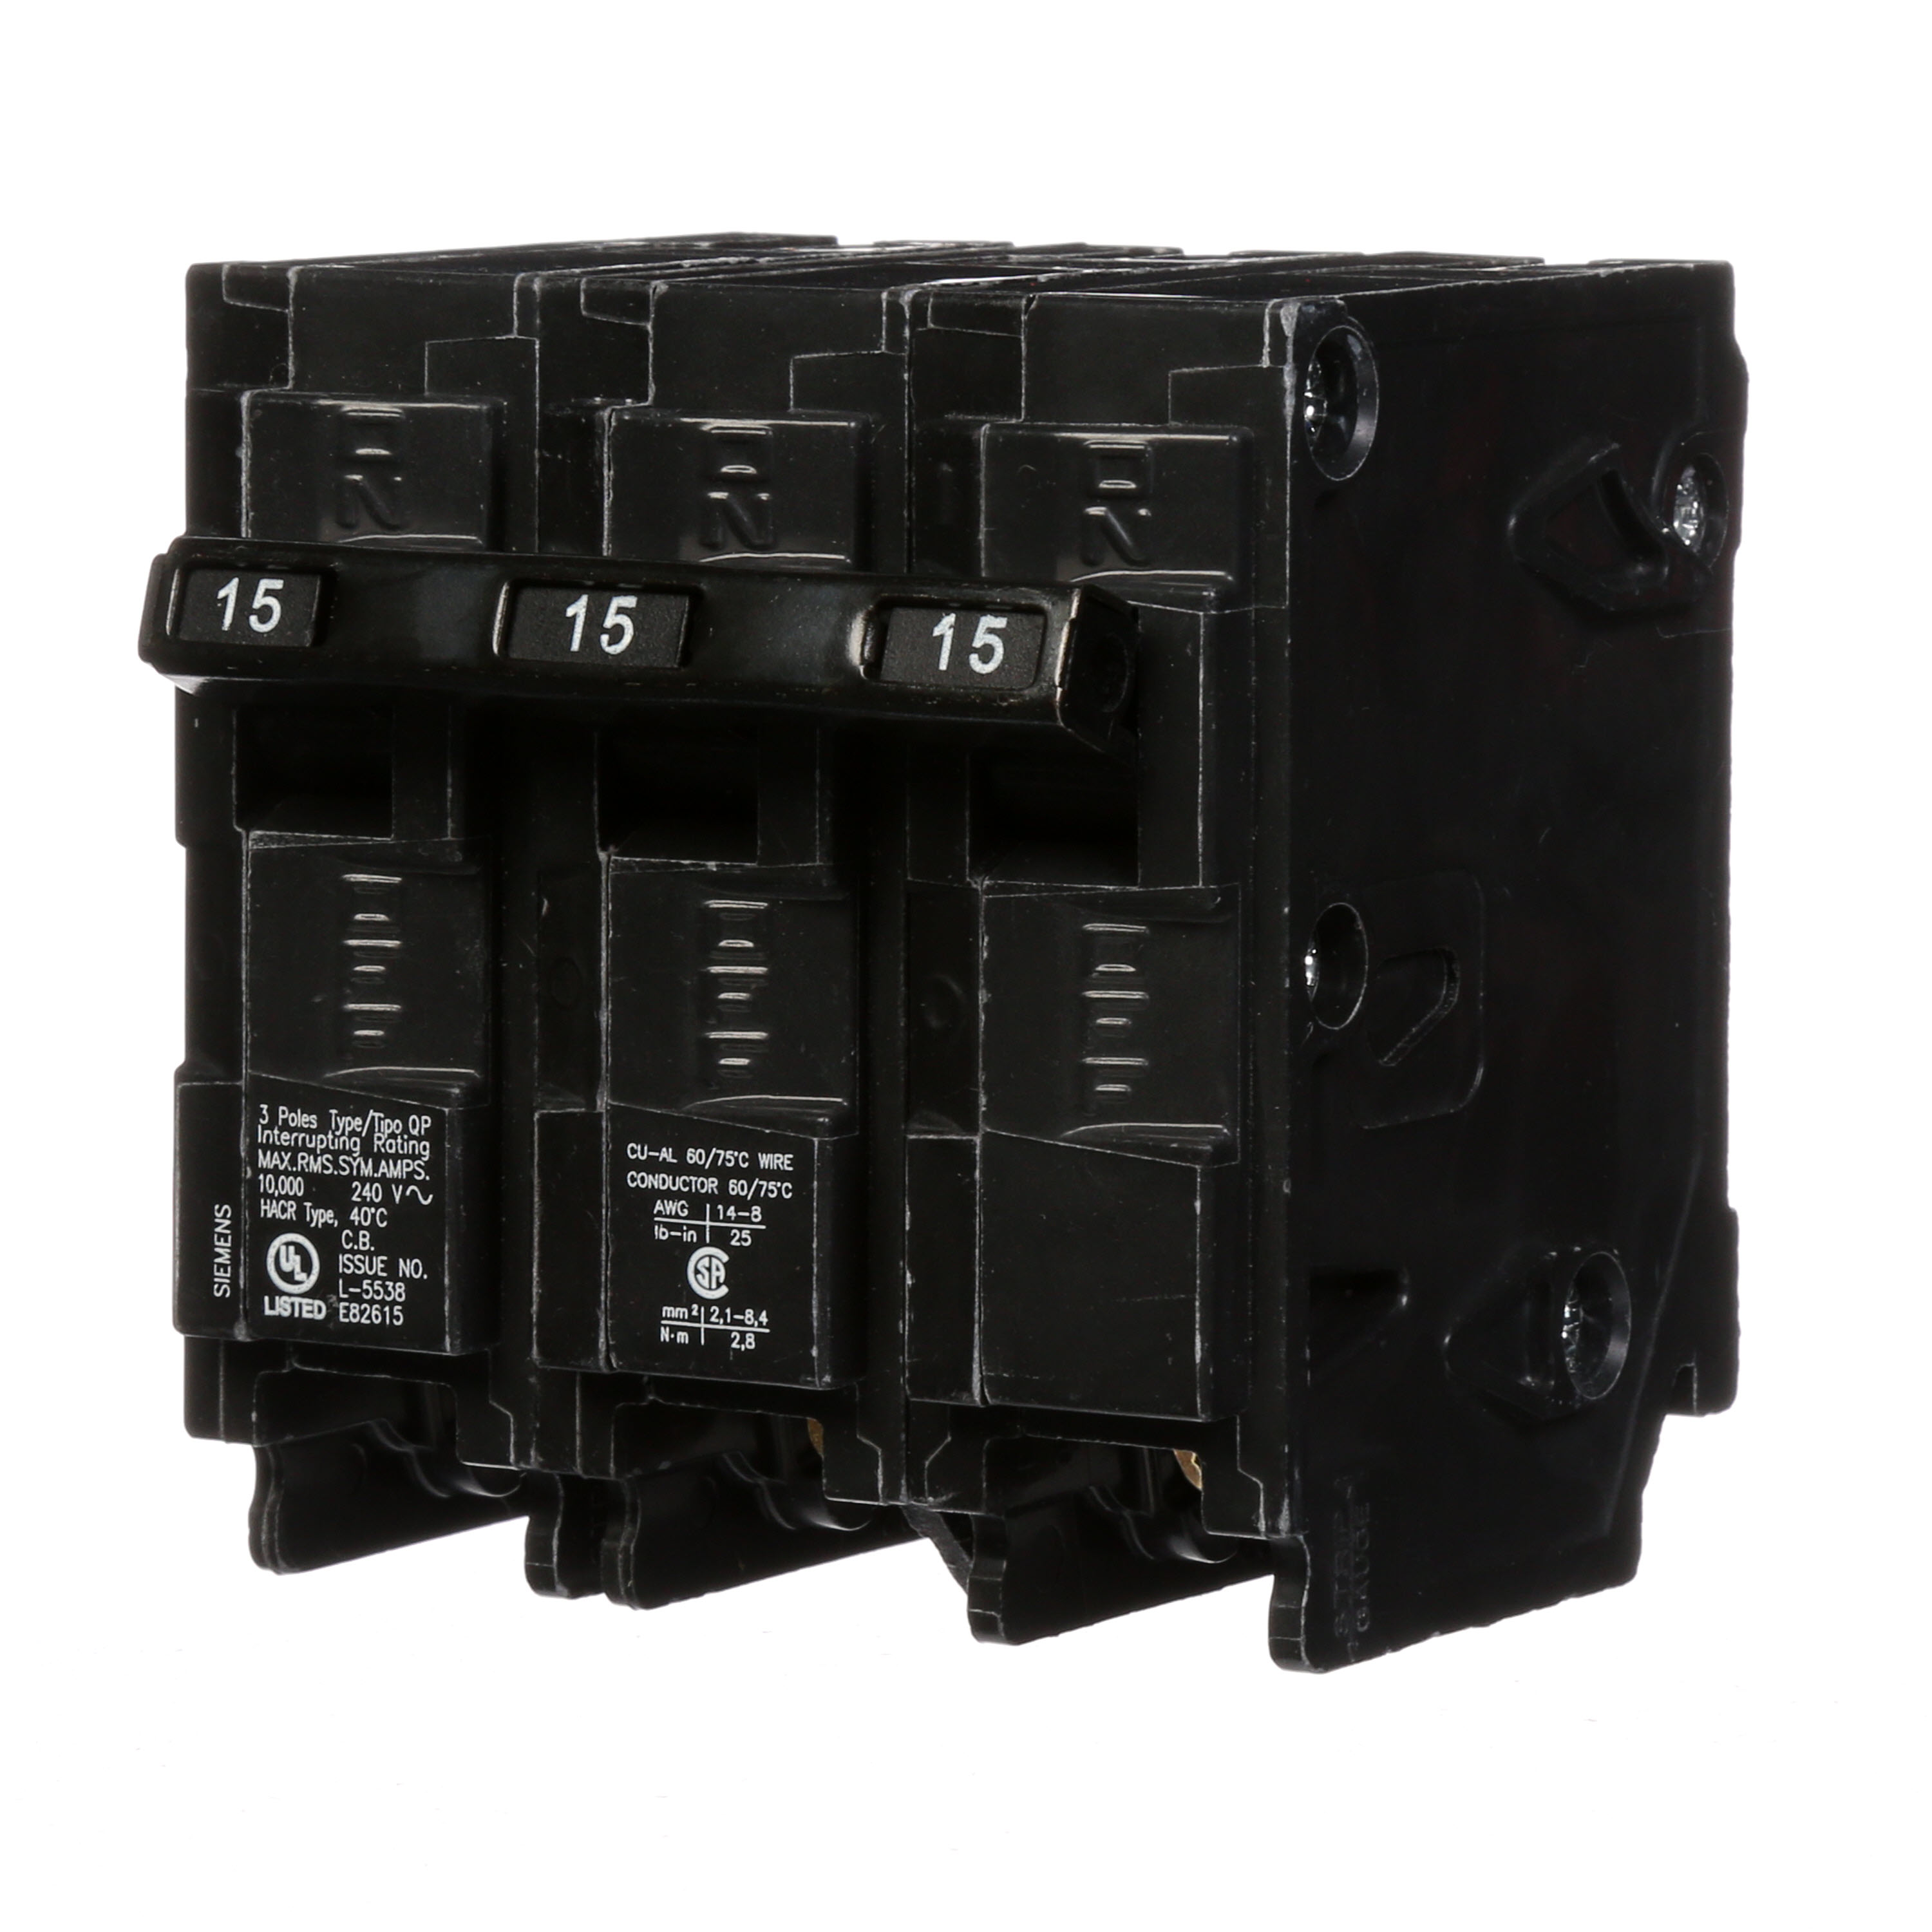 Siemens Low Voltage Residential Circuit Breakers Miniature Thermal Mag Circuit Breakers - Type QP/MP, 3-Pole, 240VAC are Circuit Protection Load Center Mains, Feeders, and Miniature Circuit Breakers. Type QP/MP Application Electrical Distribution Standard UL 489 Voltage Rating 240V Amperage Rating 15A Trip Range Thermal Magnetic Interrupt Rating 10 AIC Number Of Poles 3P